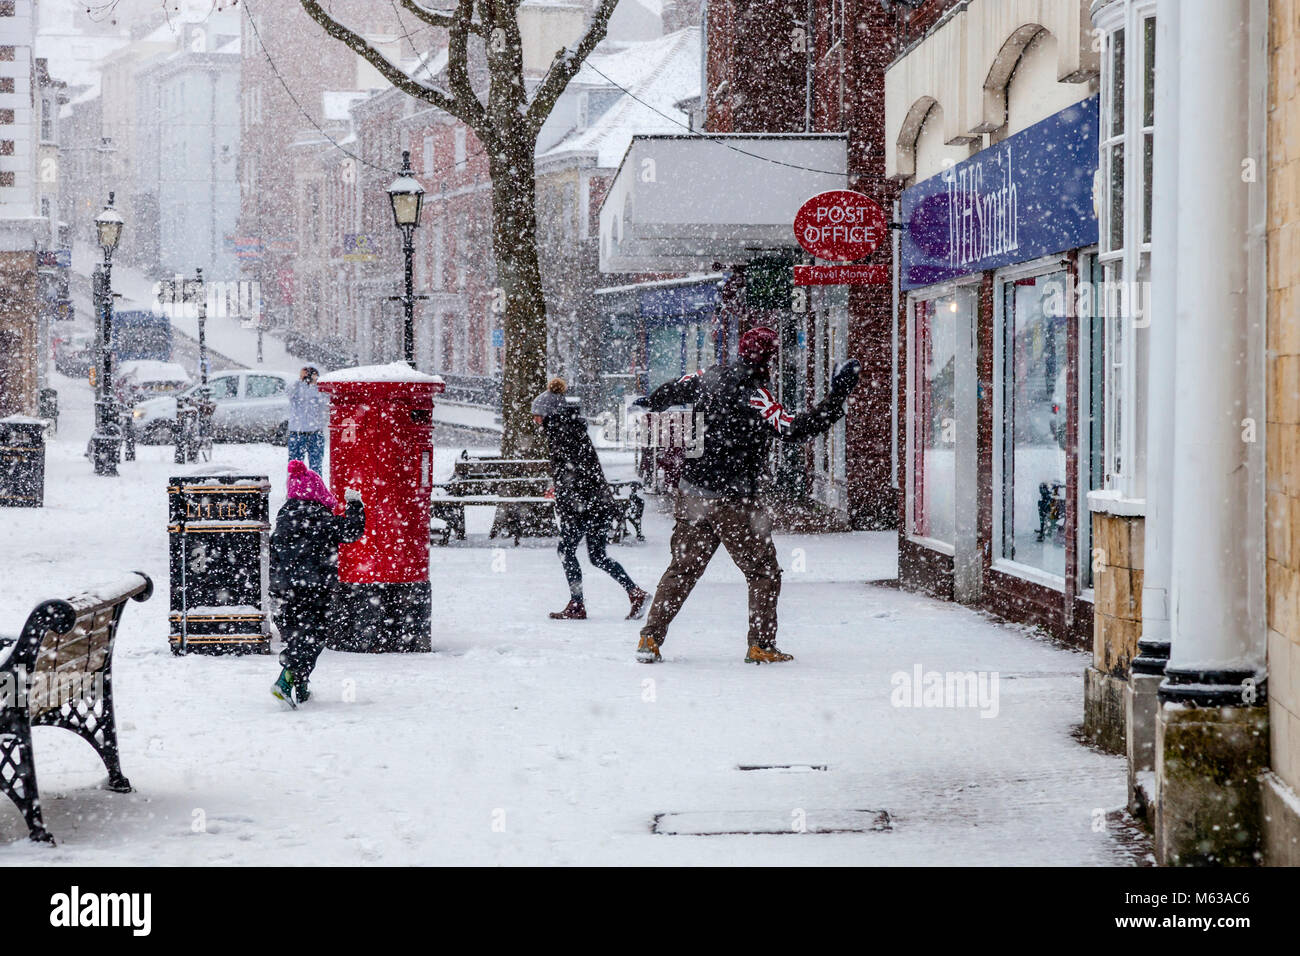 Local people playing in the snow, Lewes, Sussex, UK Stock Photo